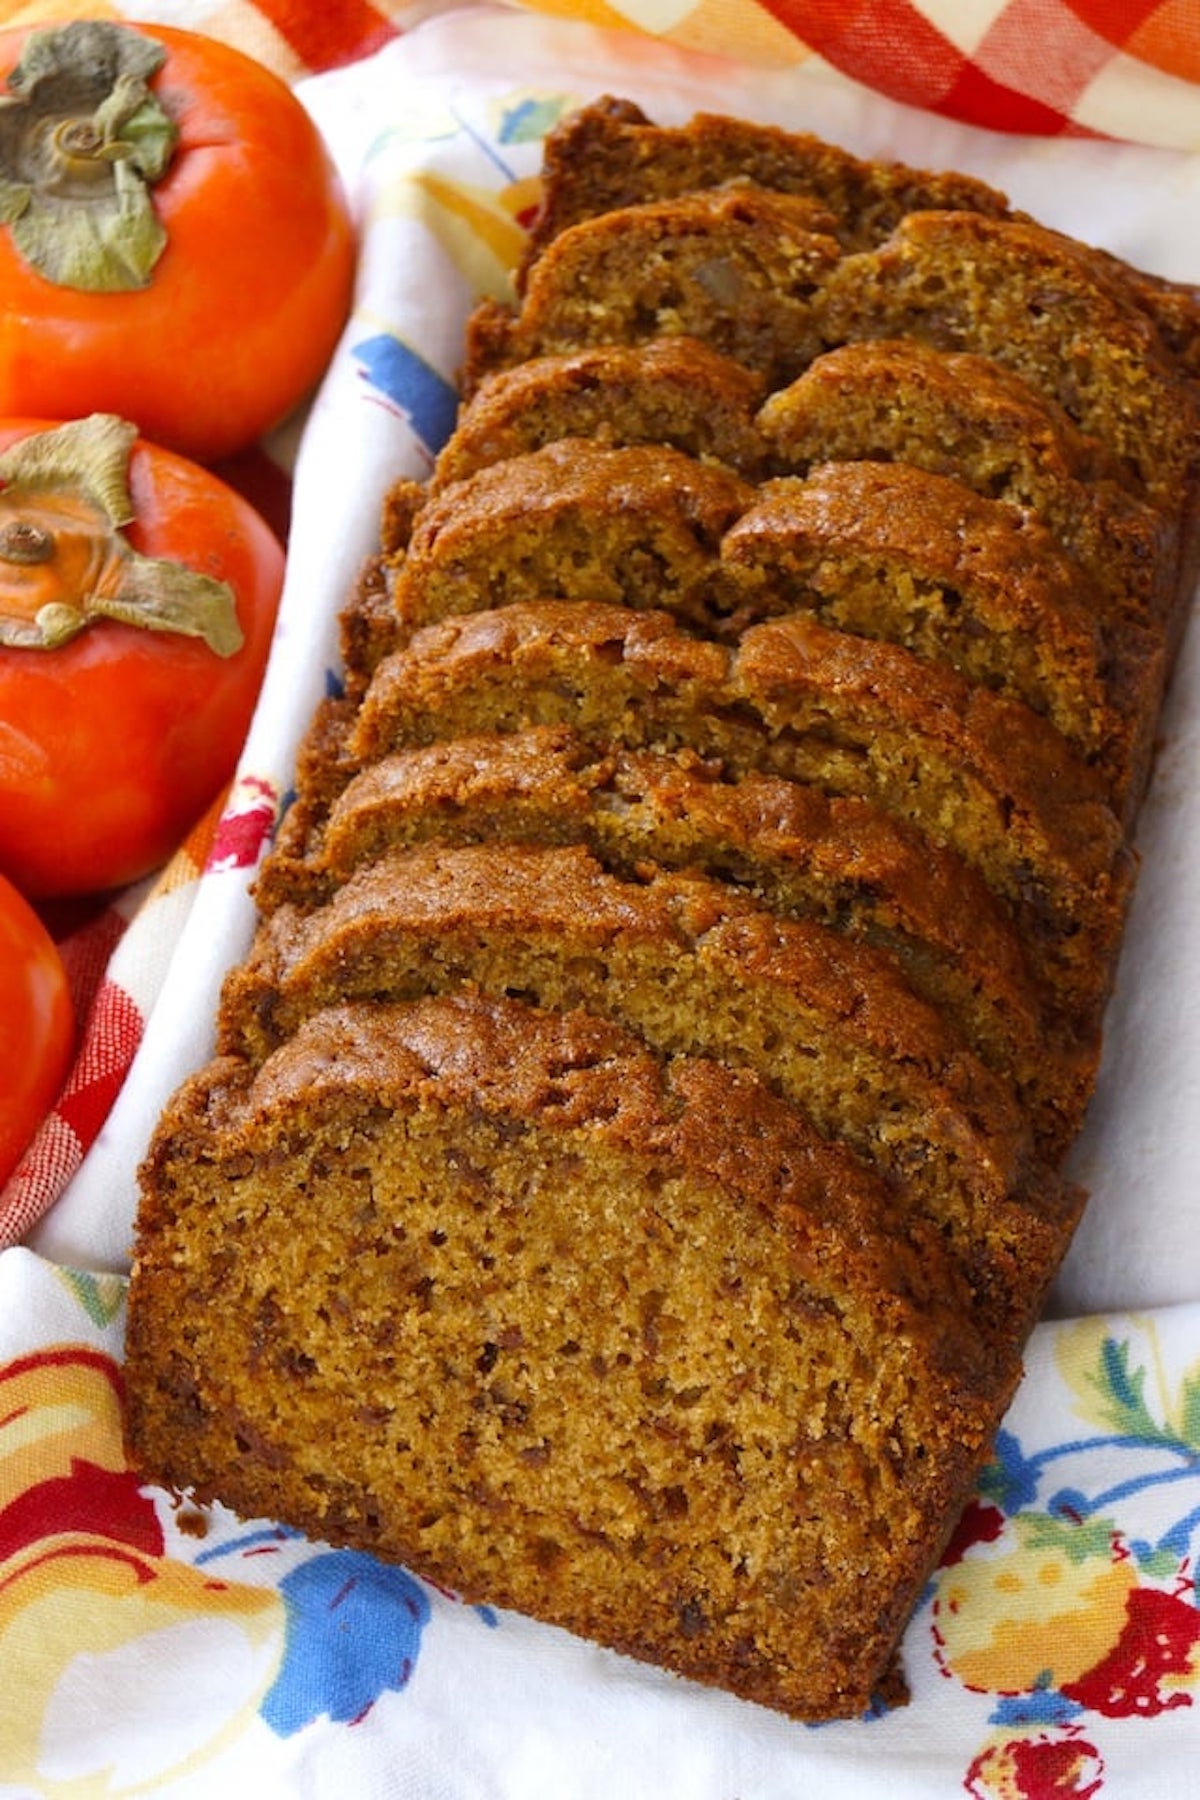 Sliced loaf of Ginger Persimmon Bread with fresh, whole persimmons